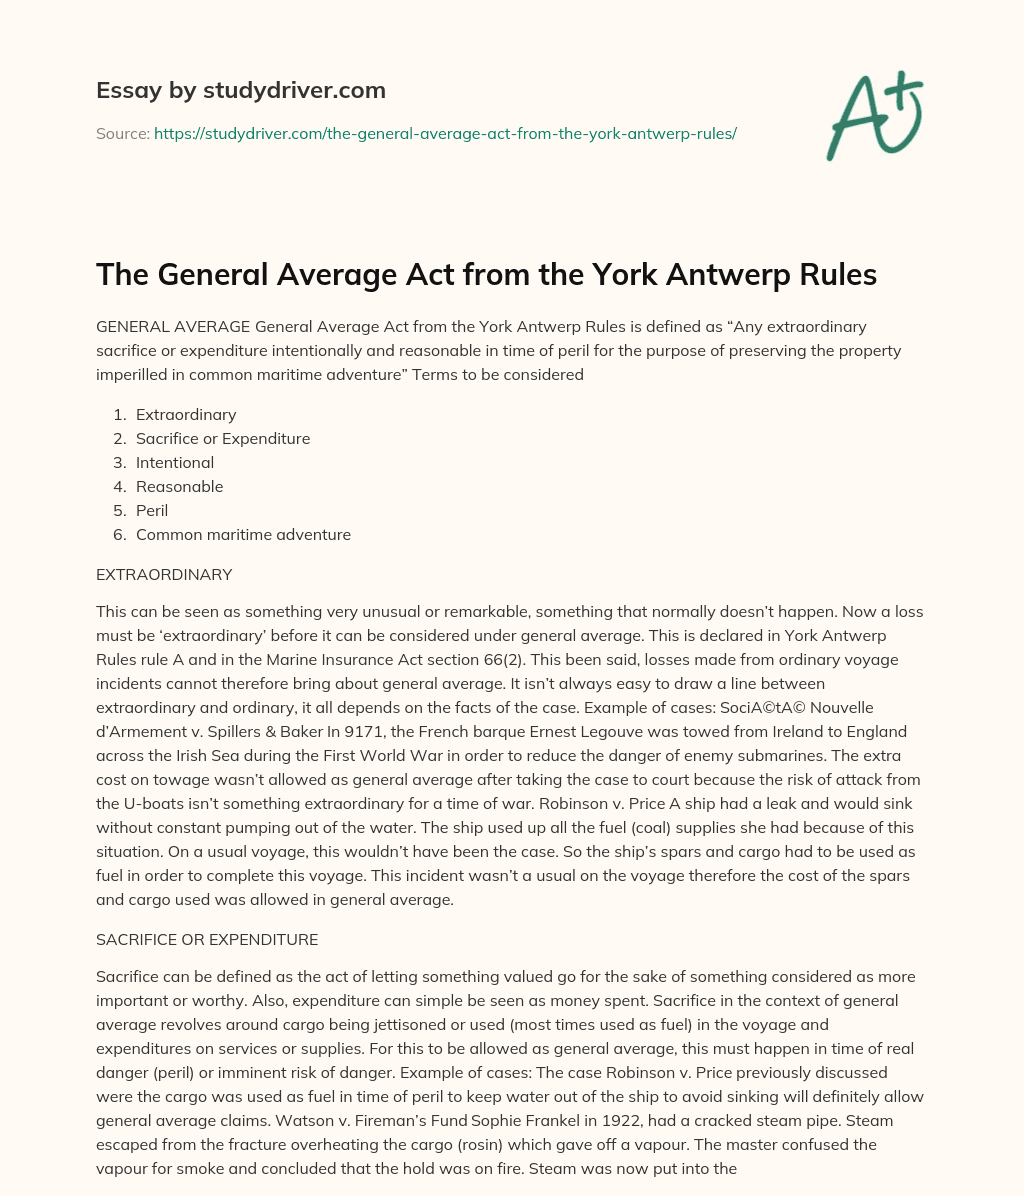 The General Average Act from the York Antwerp Rules essay